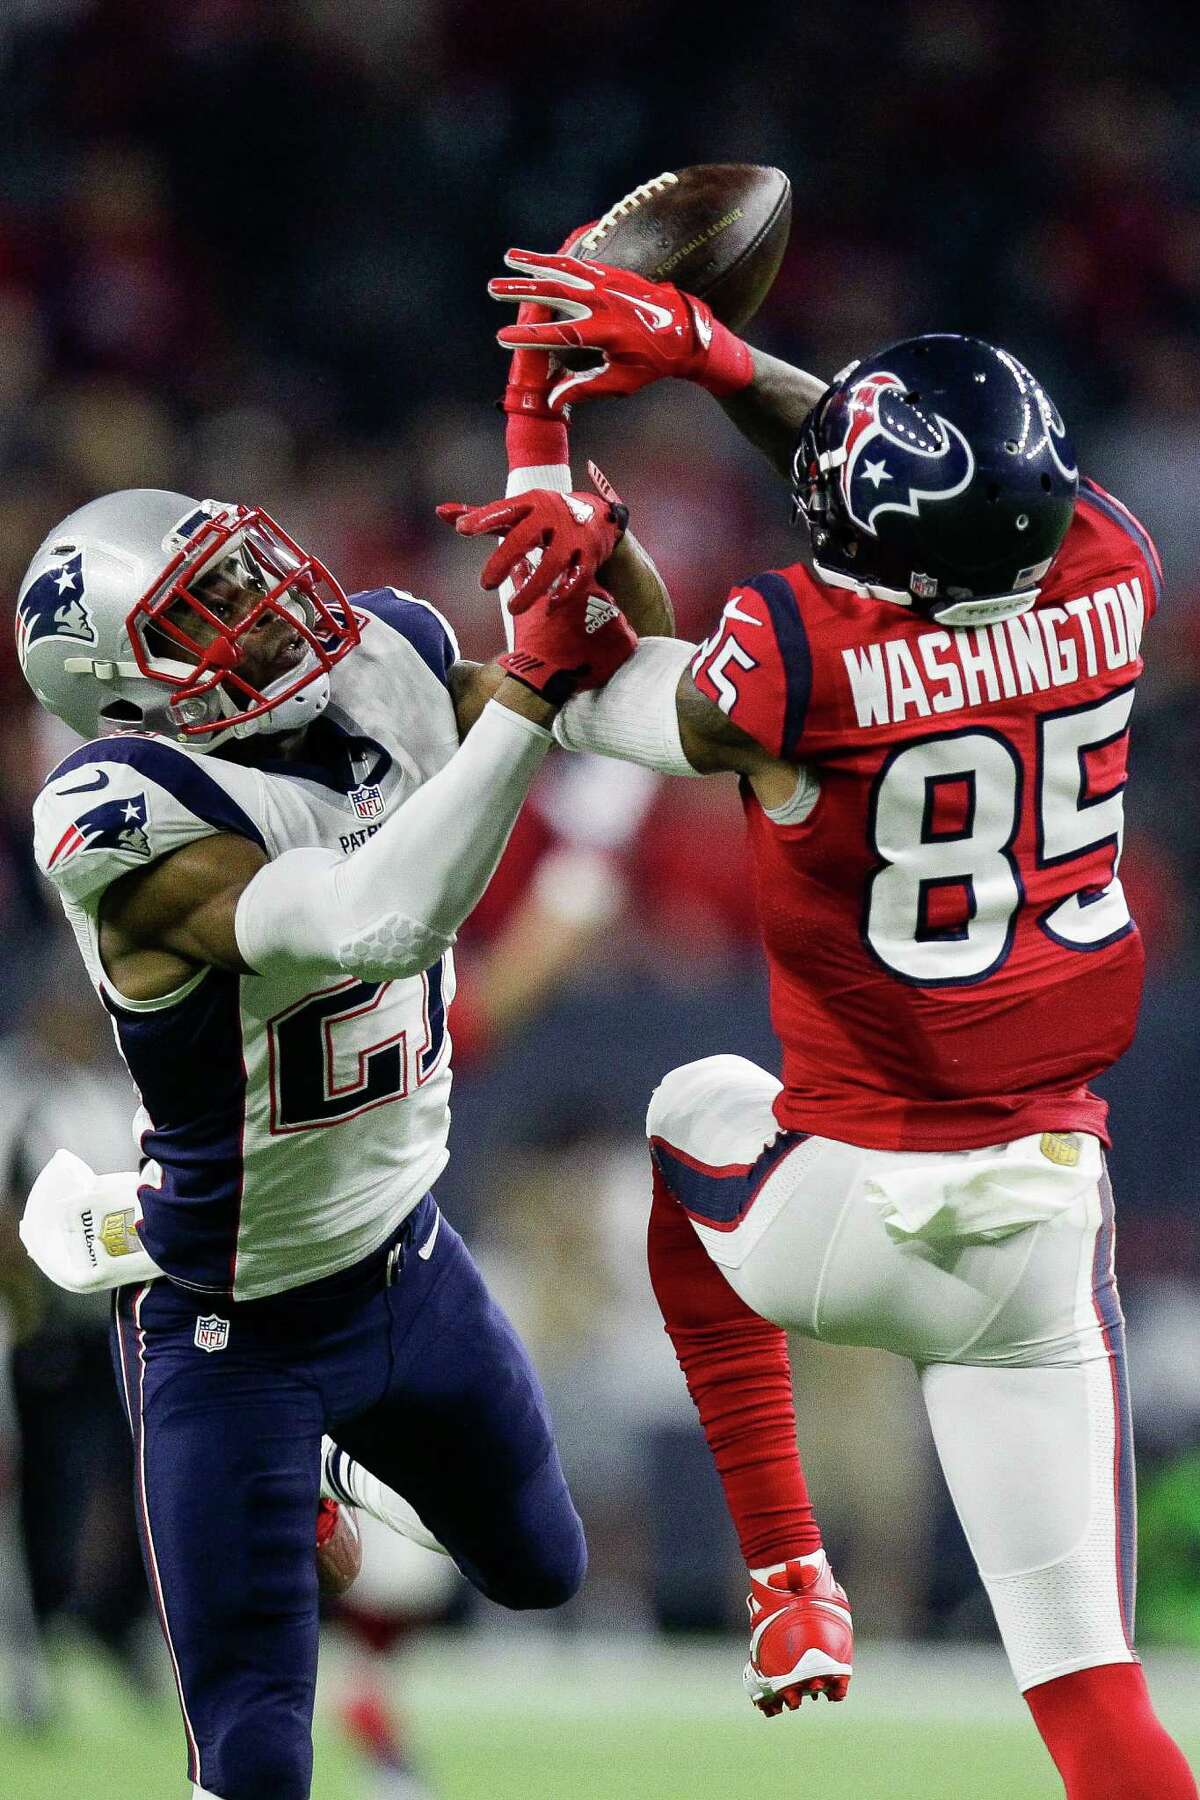 Patriots cornerback Malcolm Butler, known for a Super Bowl-deciding interception, breaks up a pass intended for Nate Washington, right, during last year's game against the Texans.